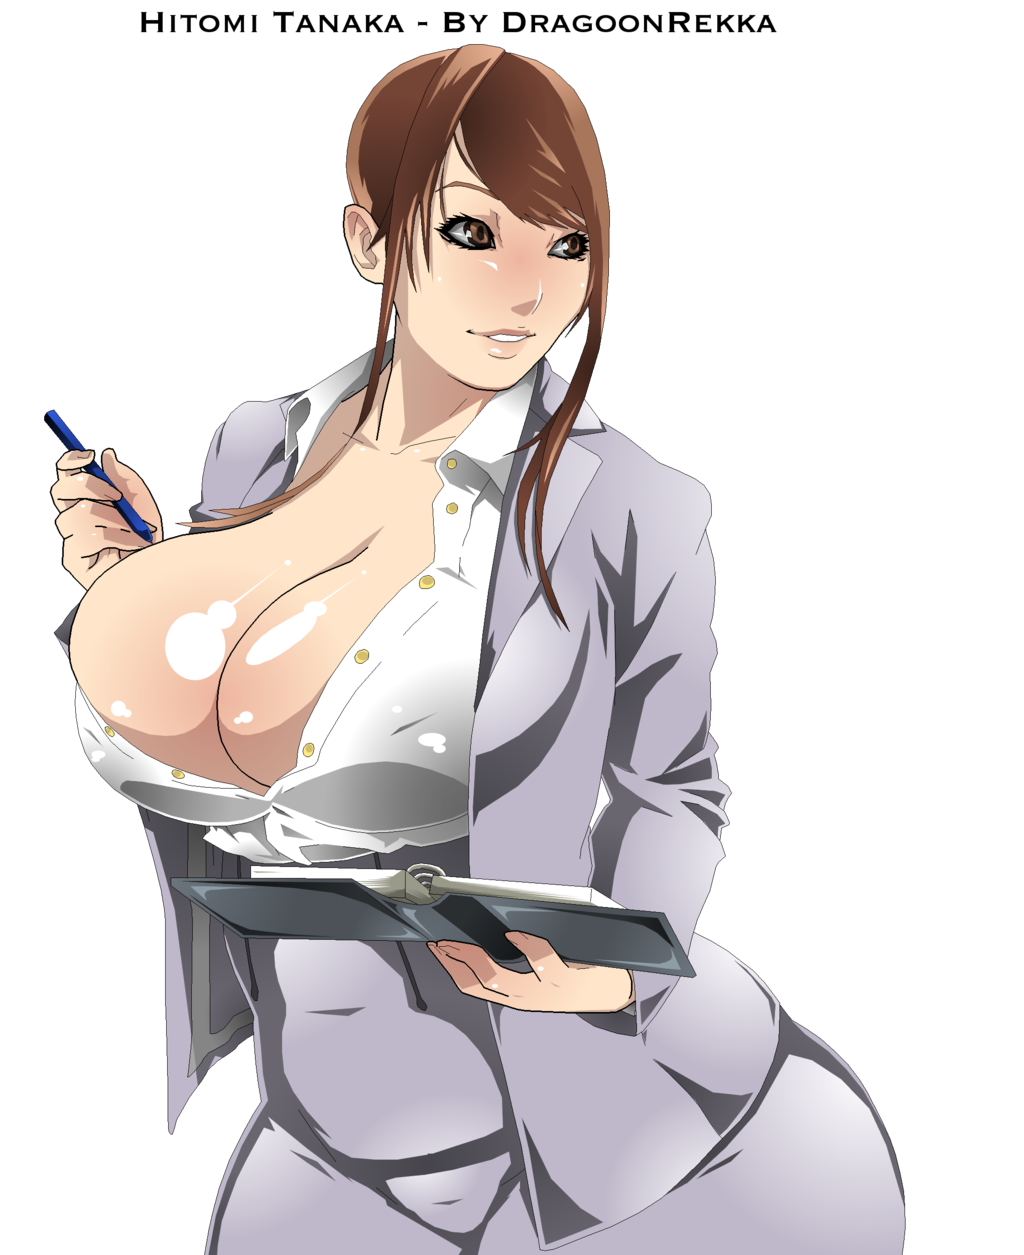 1girl artist_name big_breasts blush breasts brown_eyes brown_hair business_suit business_woman bust cleavage dragoonrekka eyelashes gigantic_breasts high_res hips hitomi_tanaka huge_breasts lips long_hair no_bra open_clothes pink_lips pornstar shiny_breasts shiny_hair shiny_skin simple_background smile suit transparent_background voluptuous wide_hips